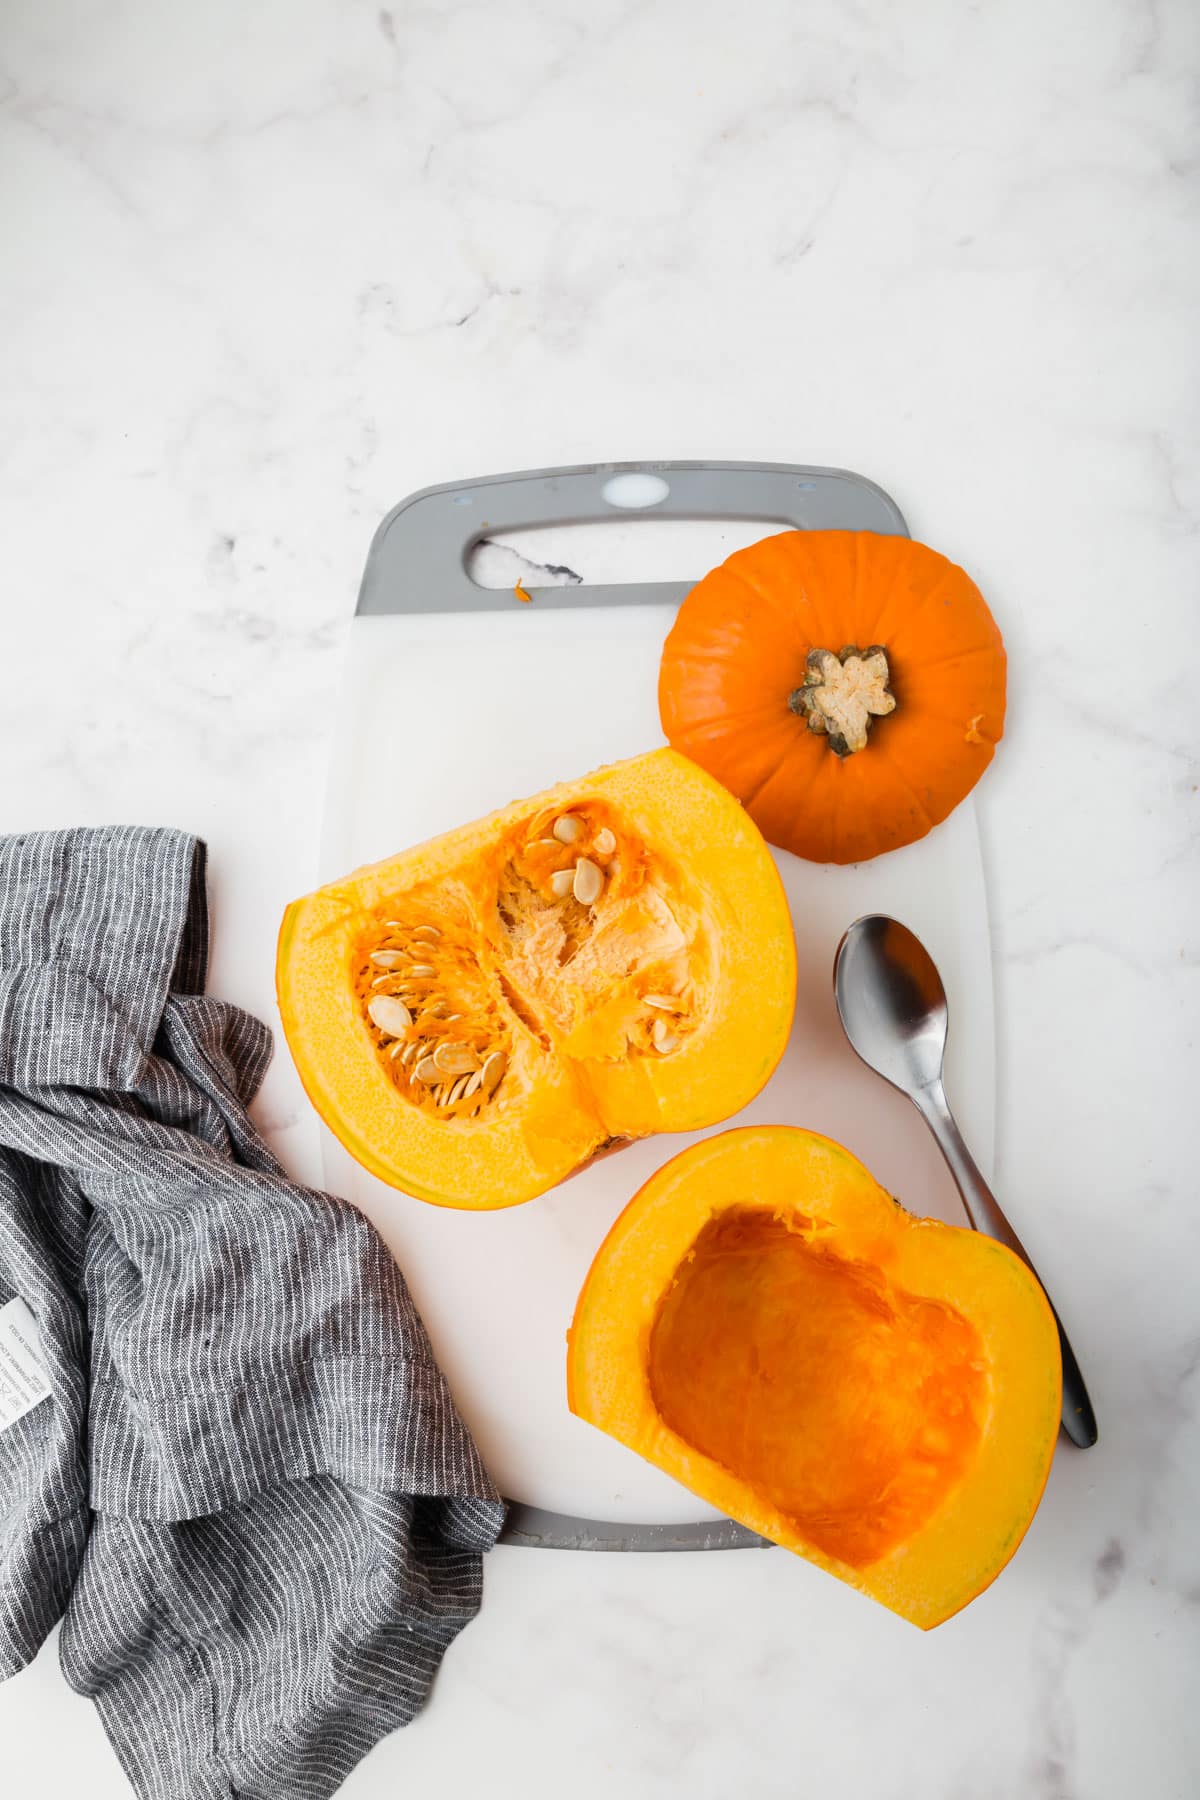 A sugar pumpkin sliced in half on a cutting board with a spoon next to it to scoop out the seeds.